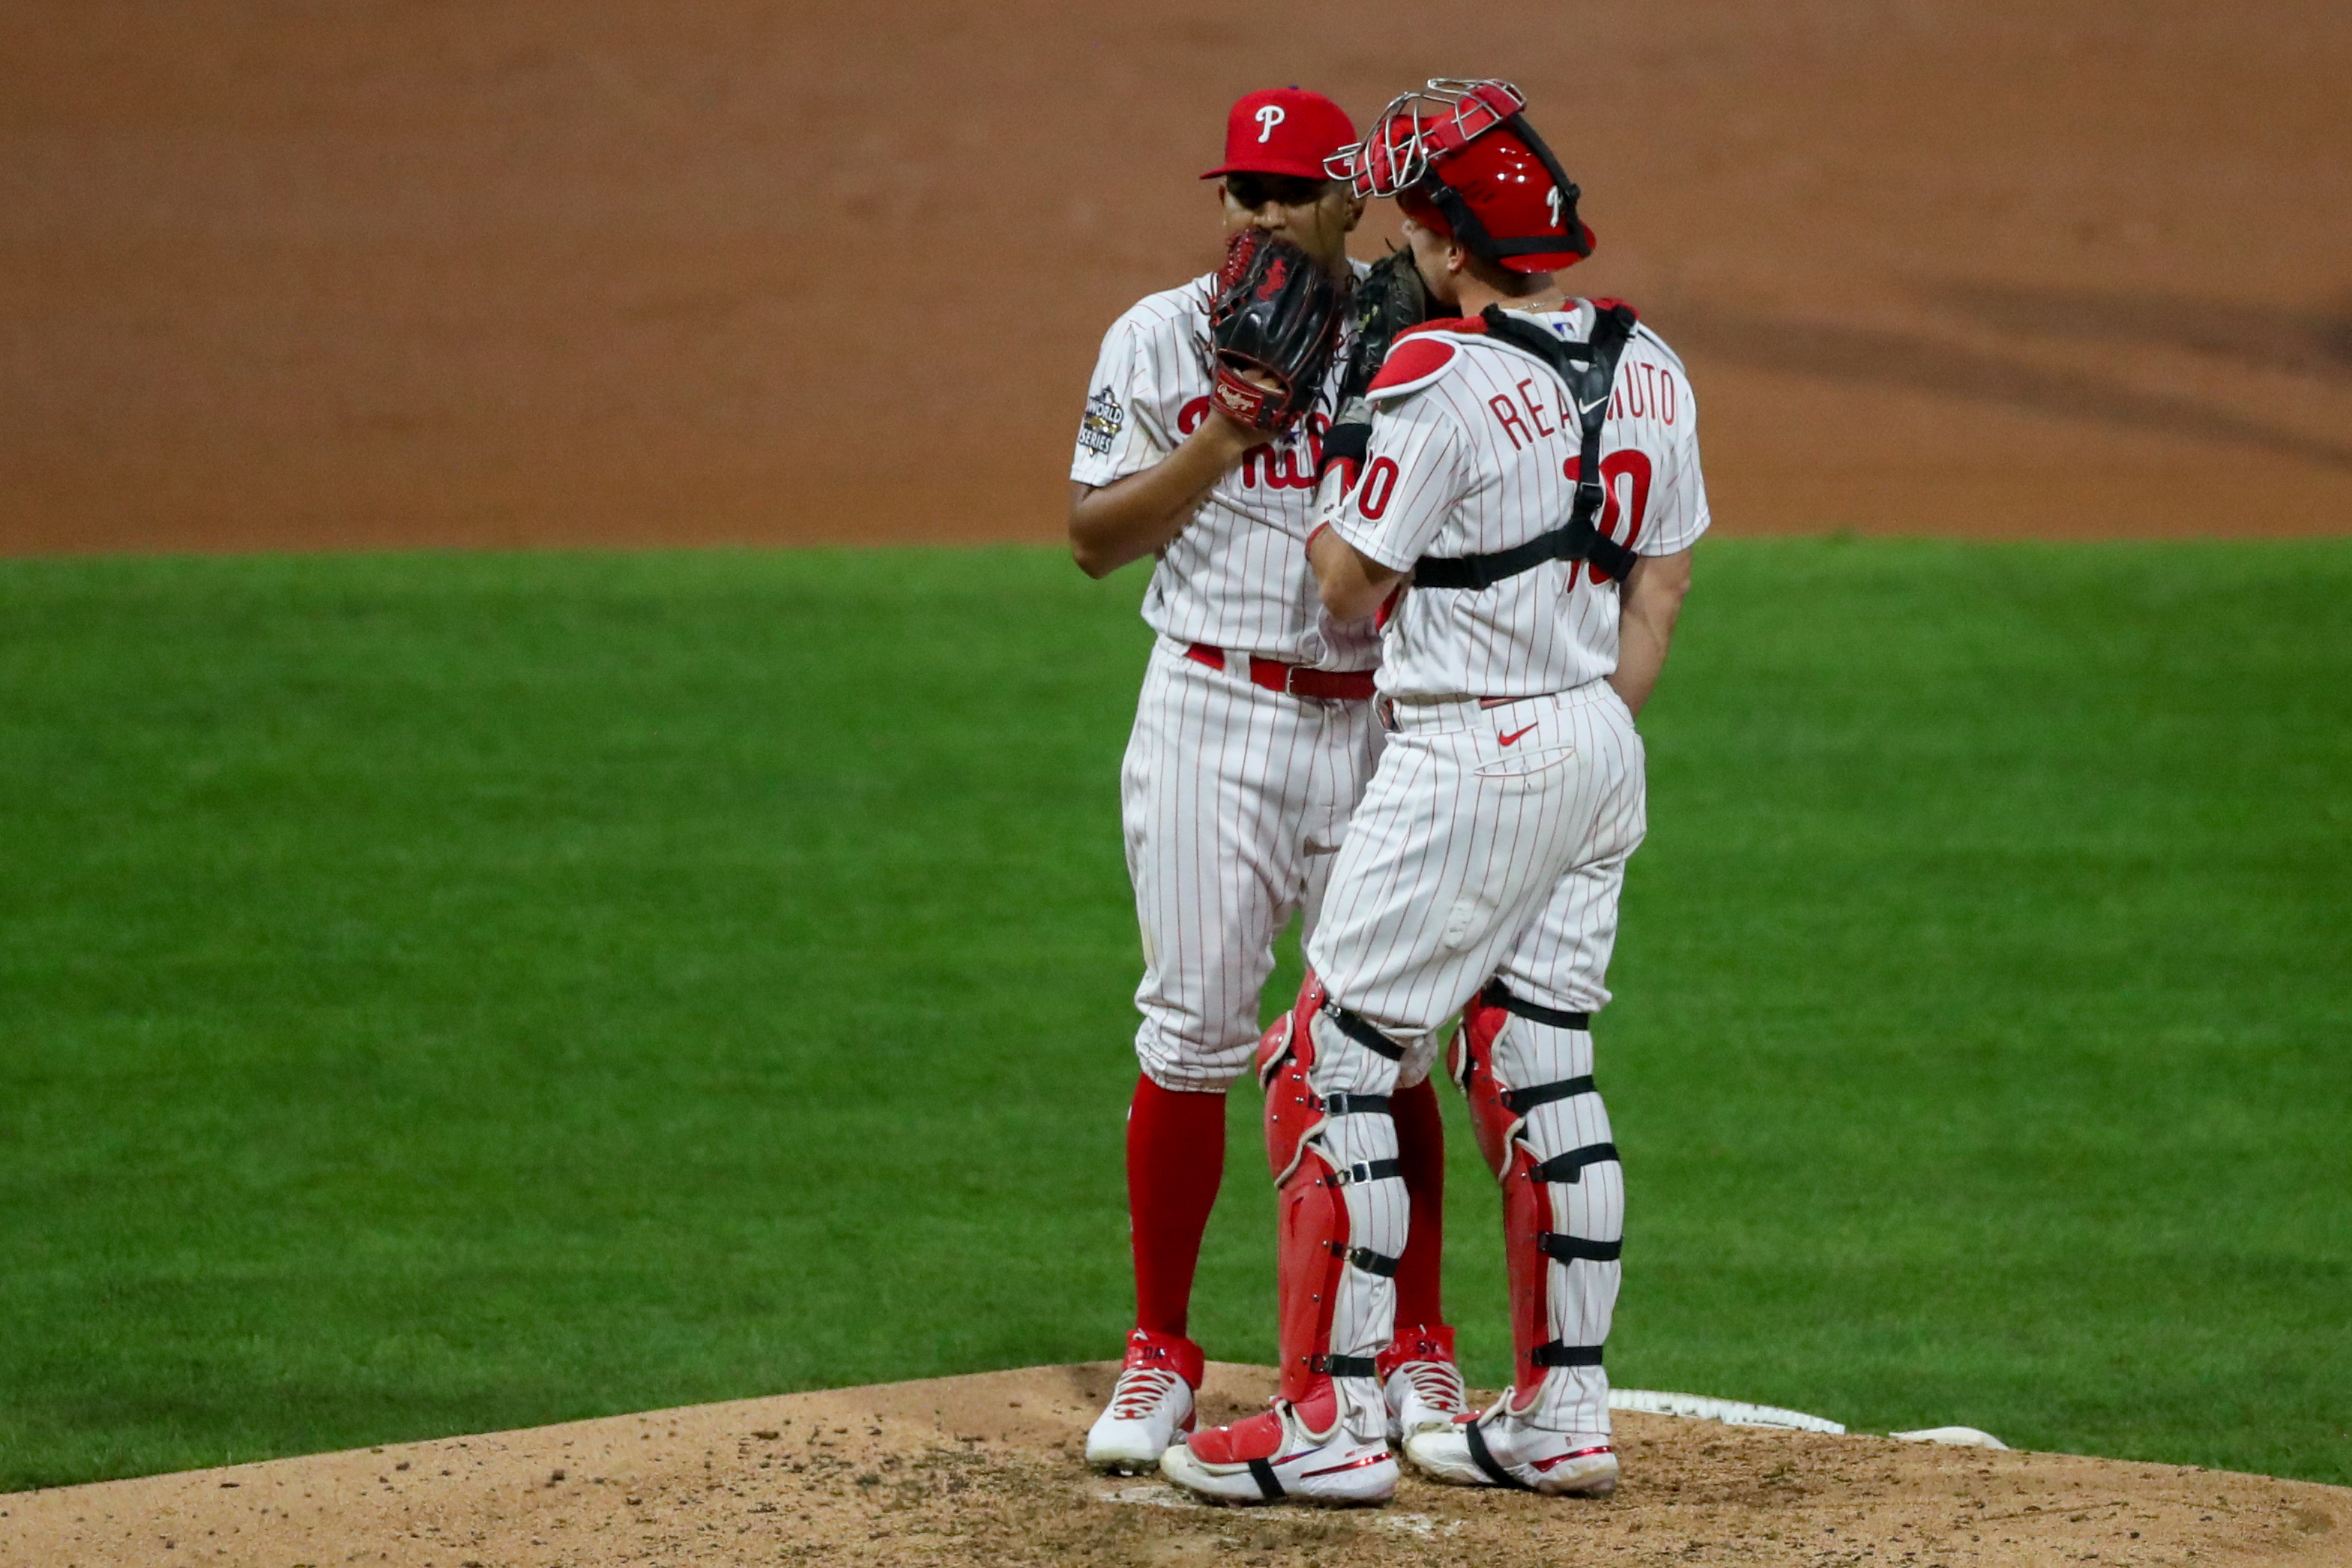 Phillies tie World Series mark with 5 HR, rout Astros in Game 3 for 2-1  series lead